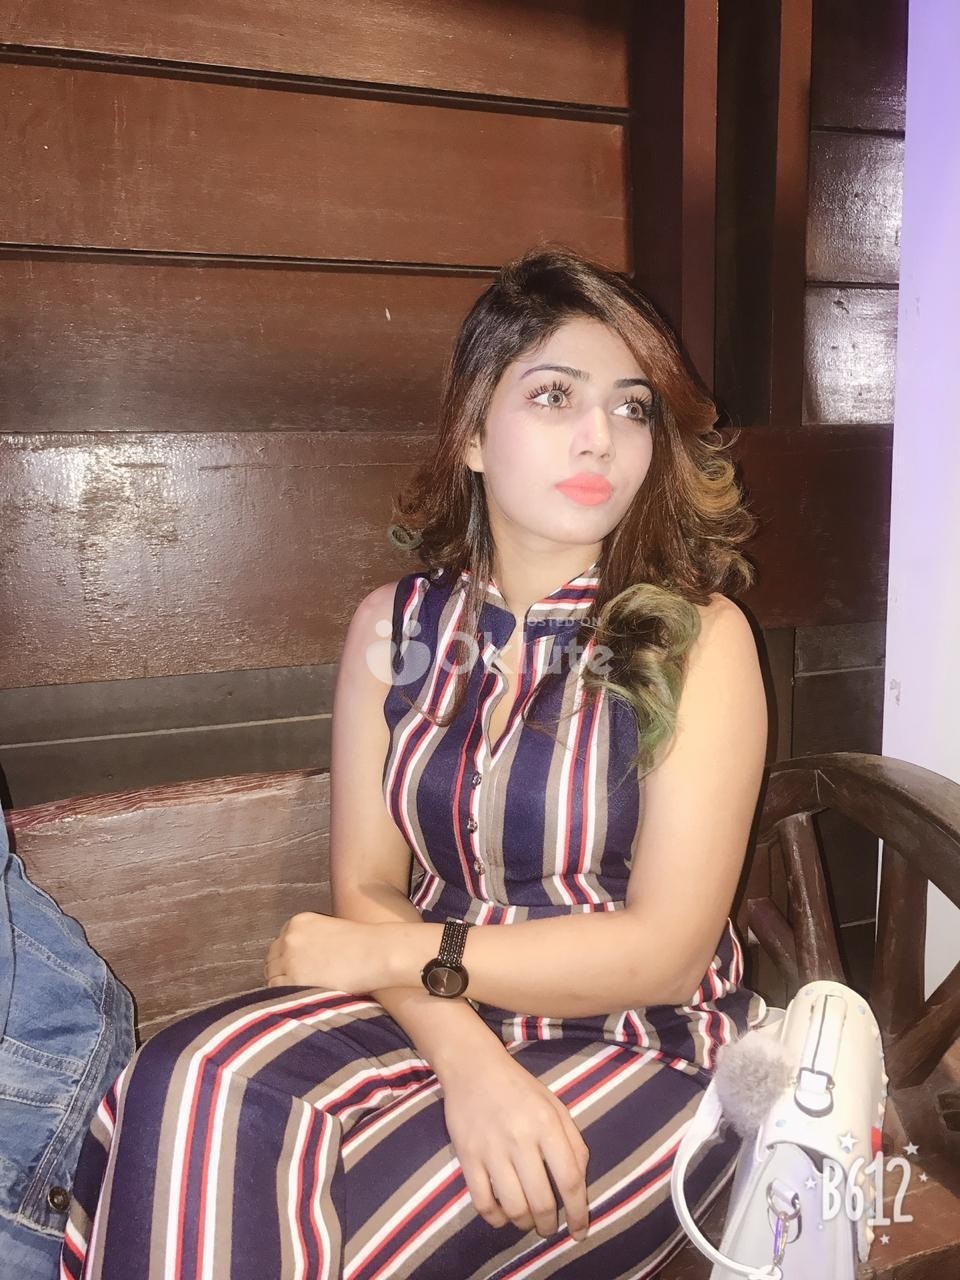 Hyderabad Low ratehigh profile independent &VIPcall girls hot bhabi air hostess giving you full satisfaction blowjob